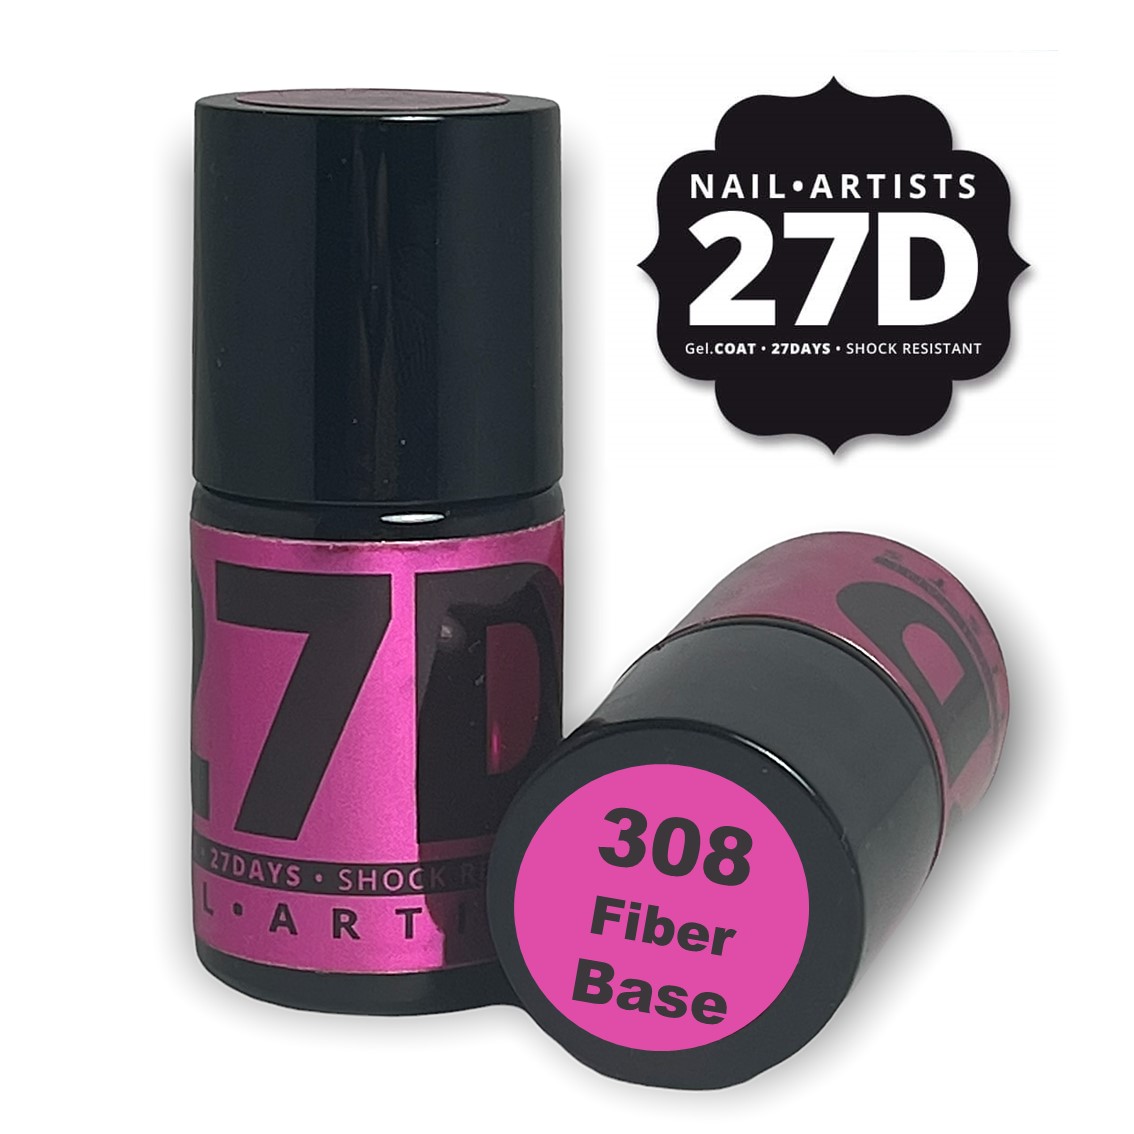 NAIL ARTISTS 27D Base Coat 308 Fiber Base Strong Frosted Pink